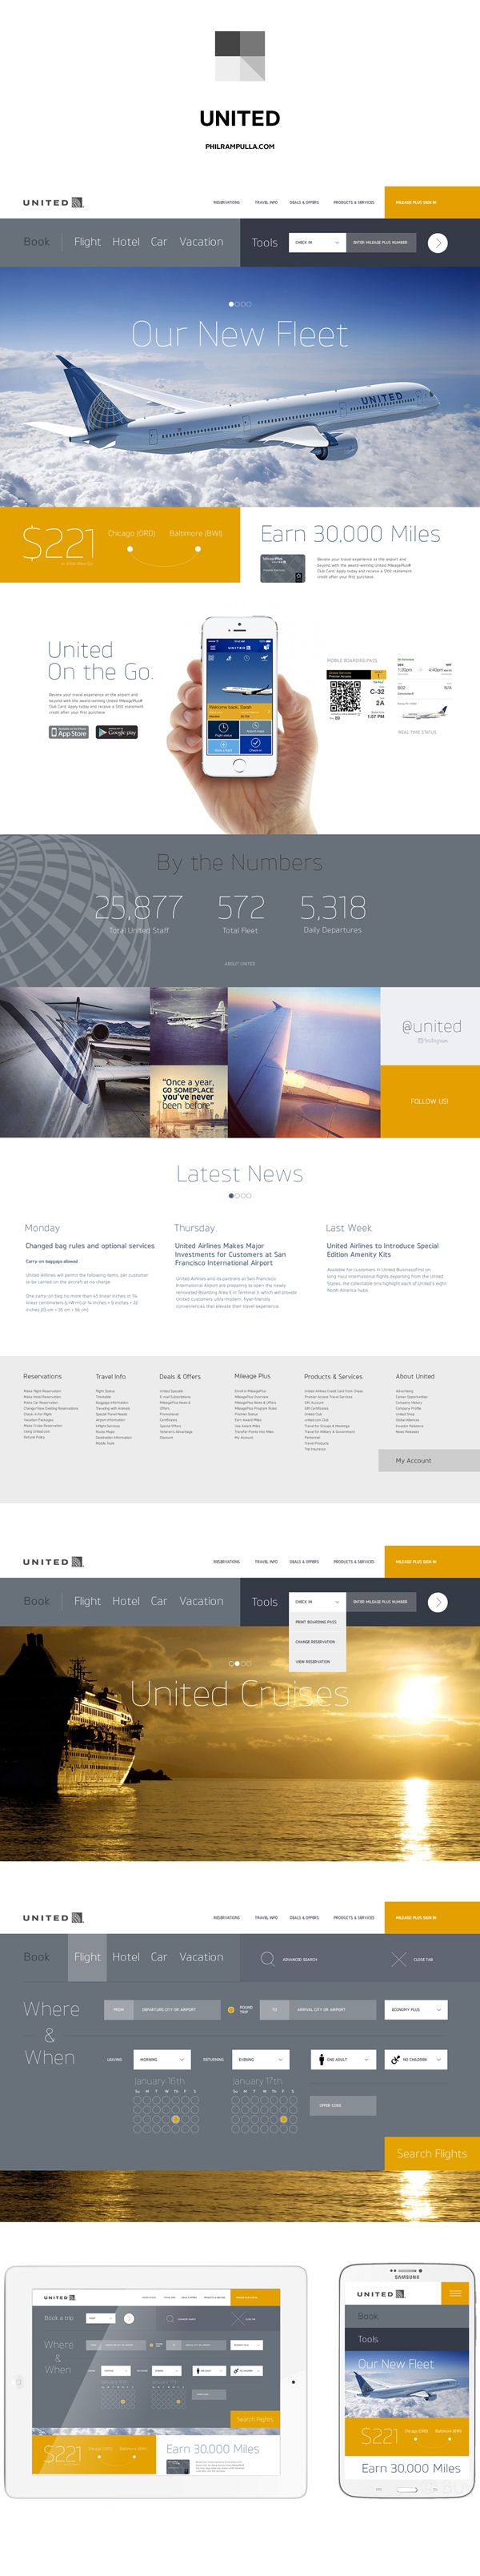 United Airlines Website Redesign by Phil Rampulla